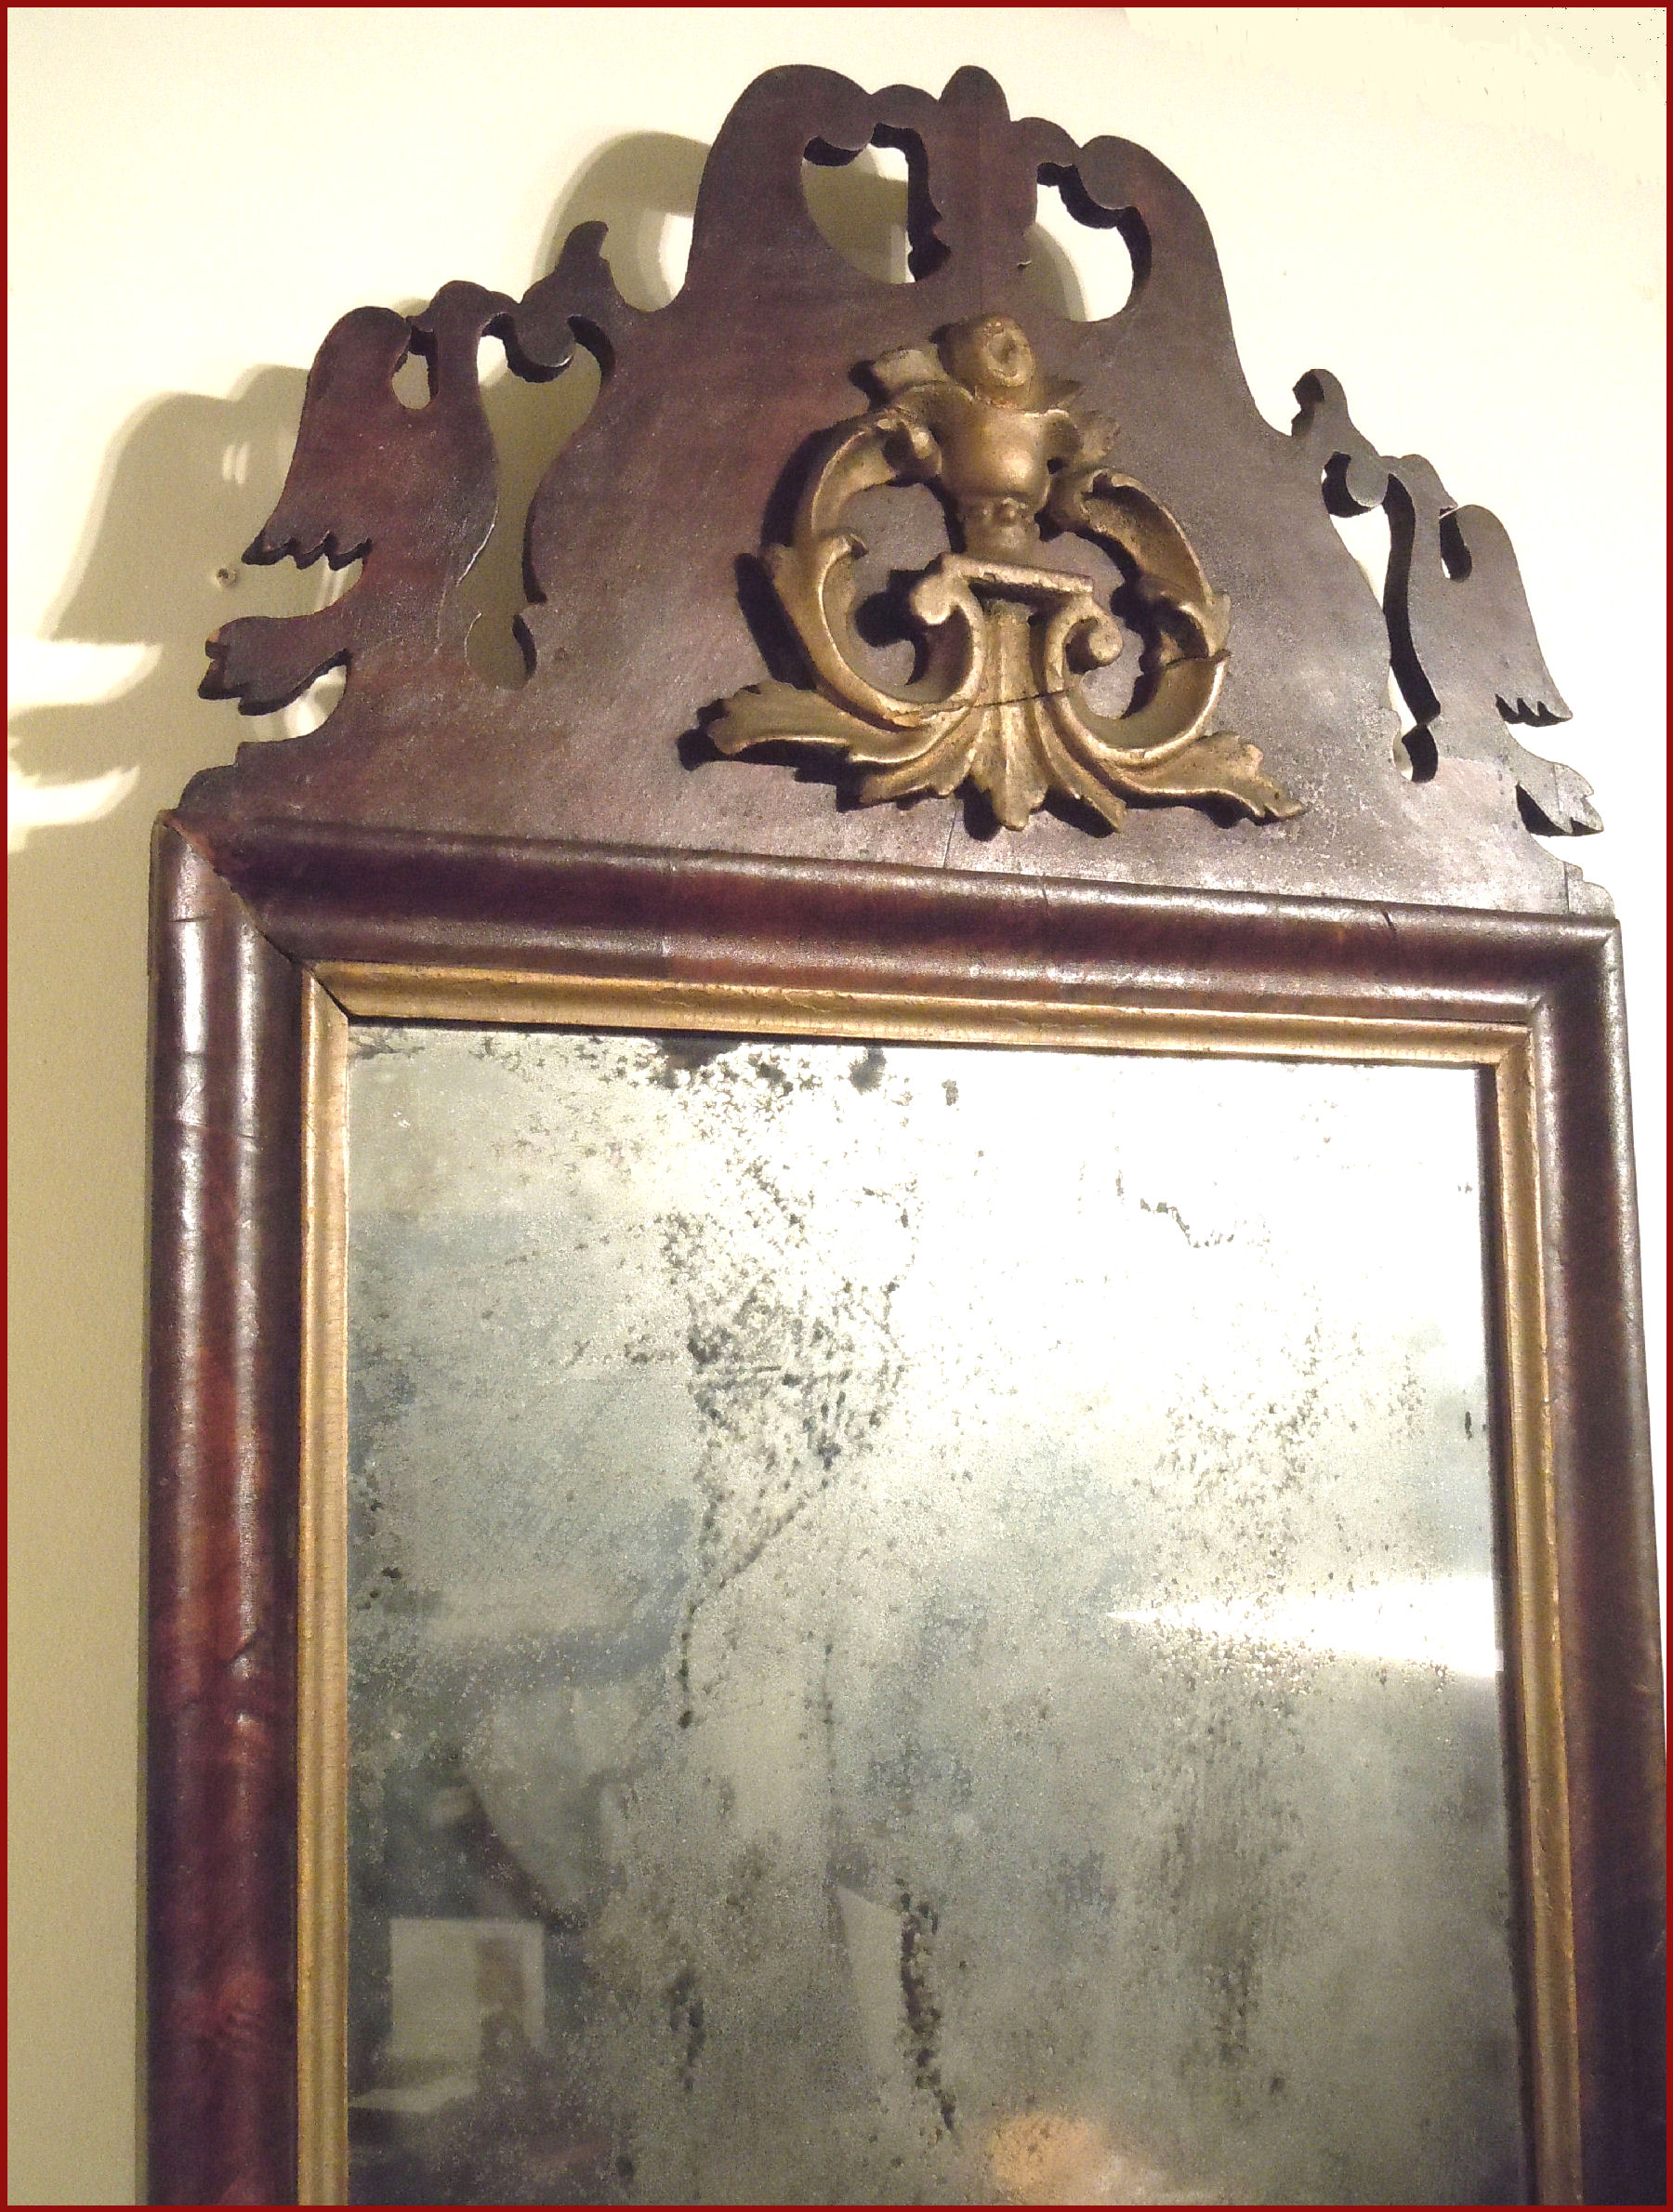 ANTIQUE LOOKING GLASS MIRROR